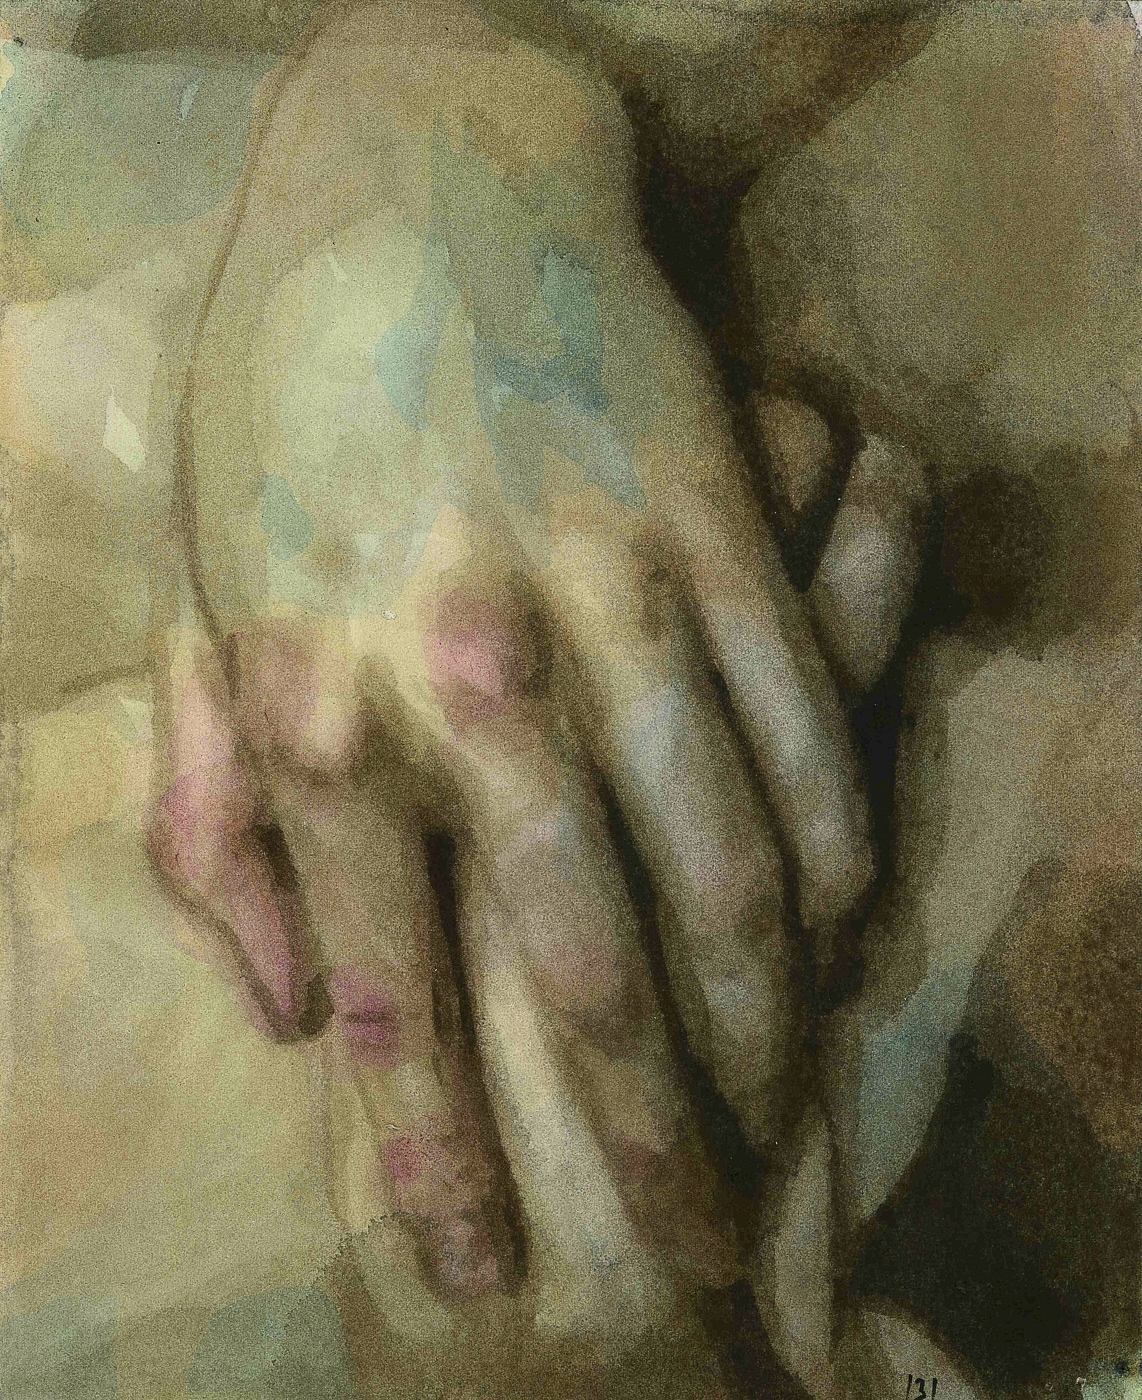 "Hands". Acrylic & watercolor on paper, 17x21 cm